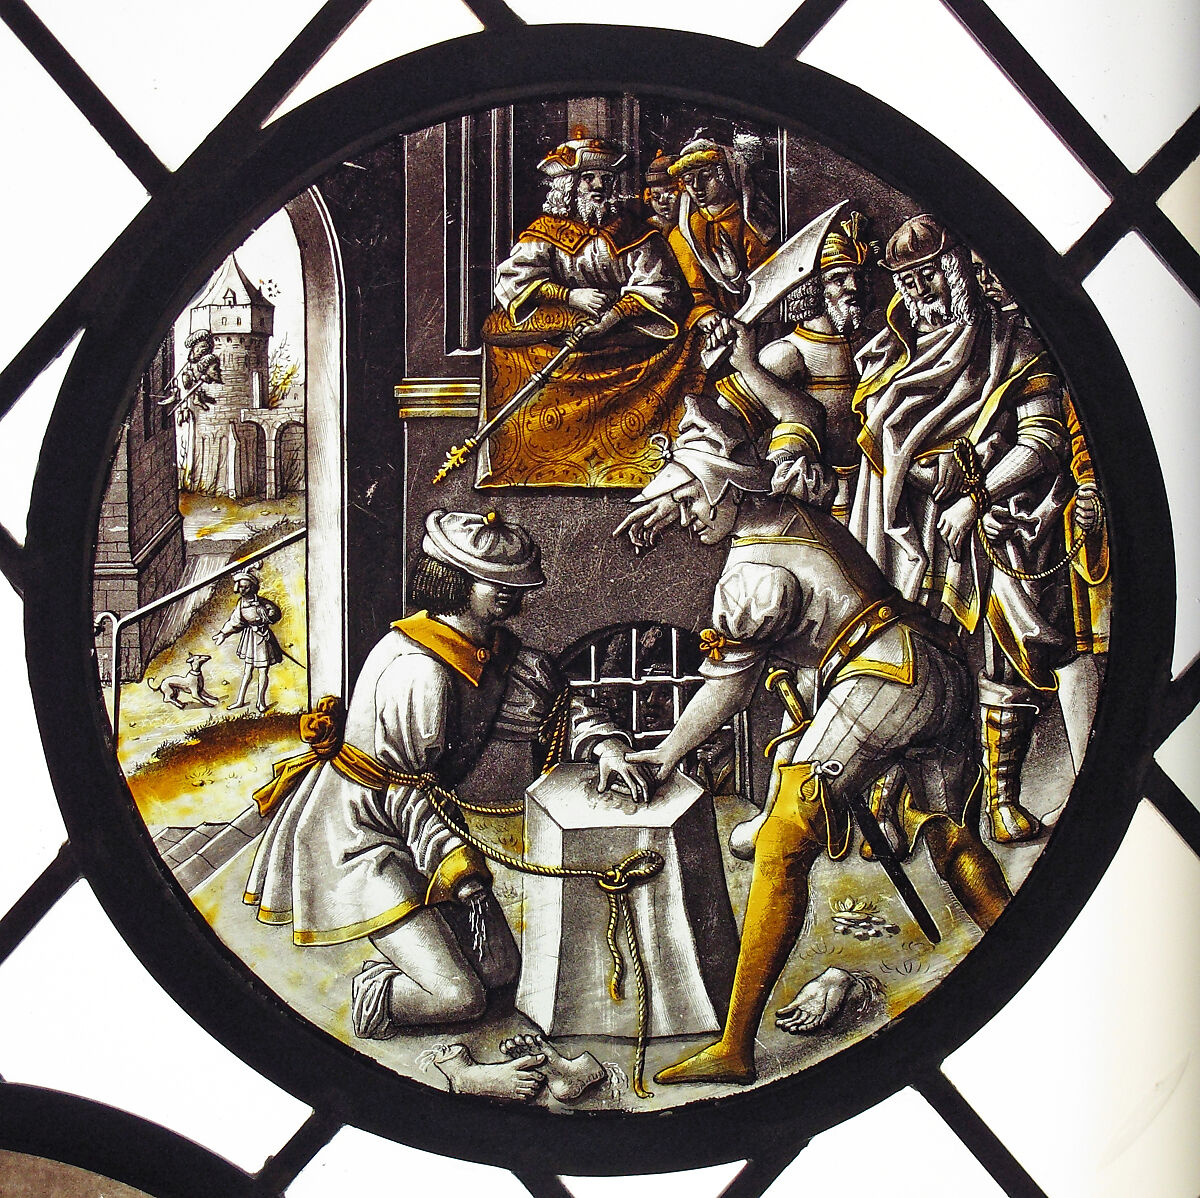 Roundel with Martyrdom of Saint Jacobus Intercisus, Colorless glass, vitreous paint and silver stain, North Netherlandish or South Netherlandish 